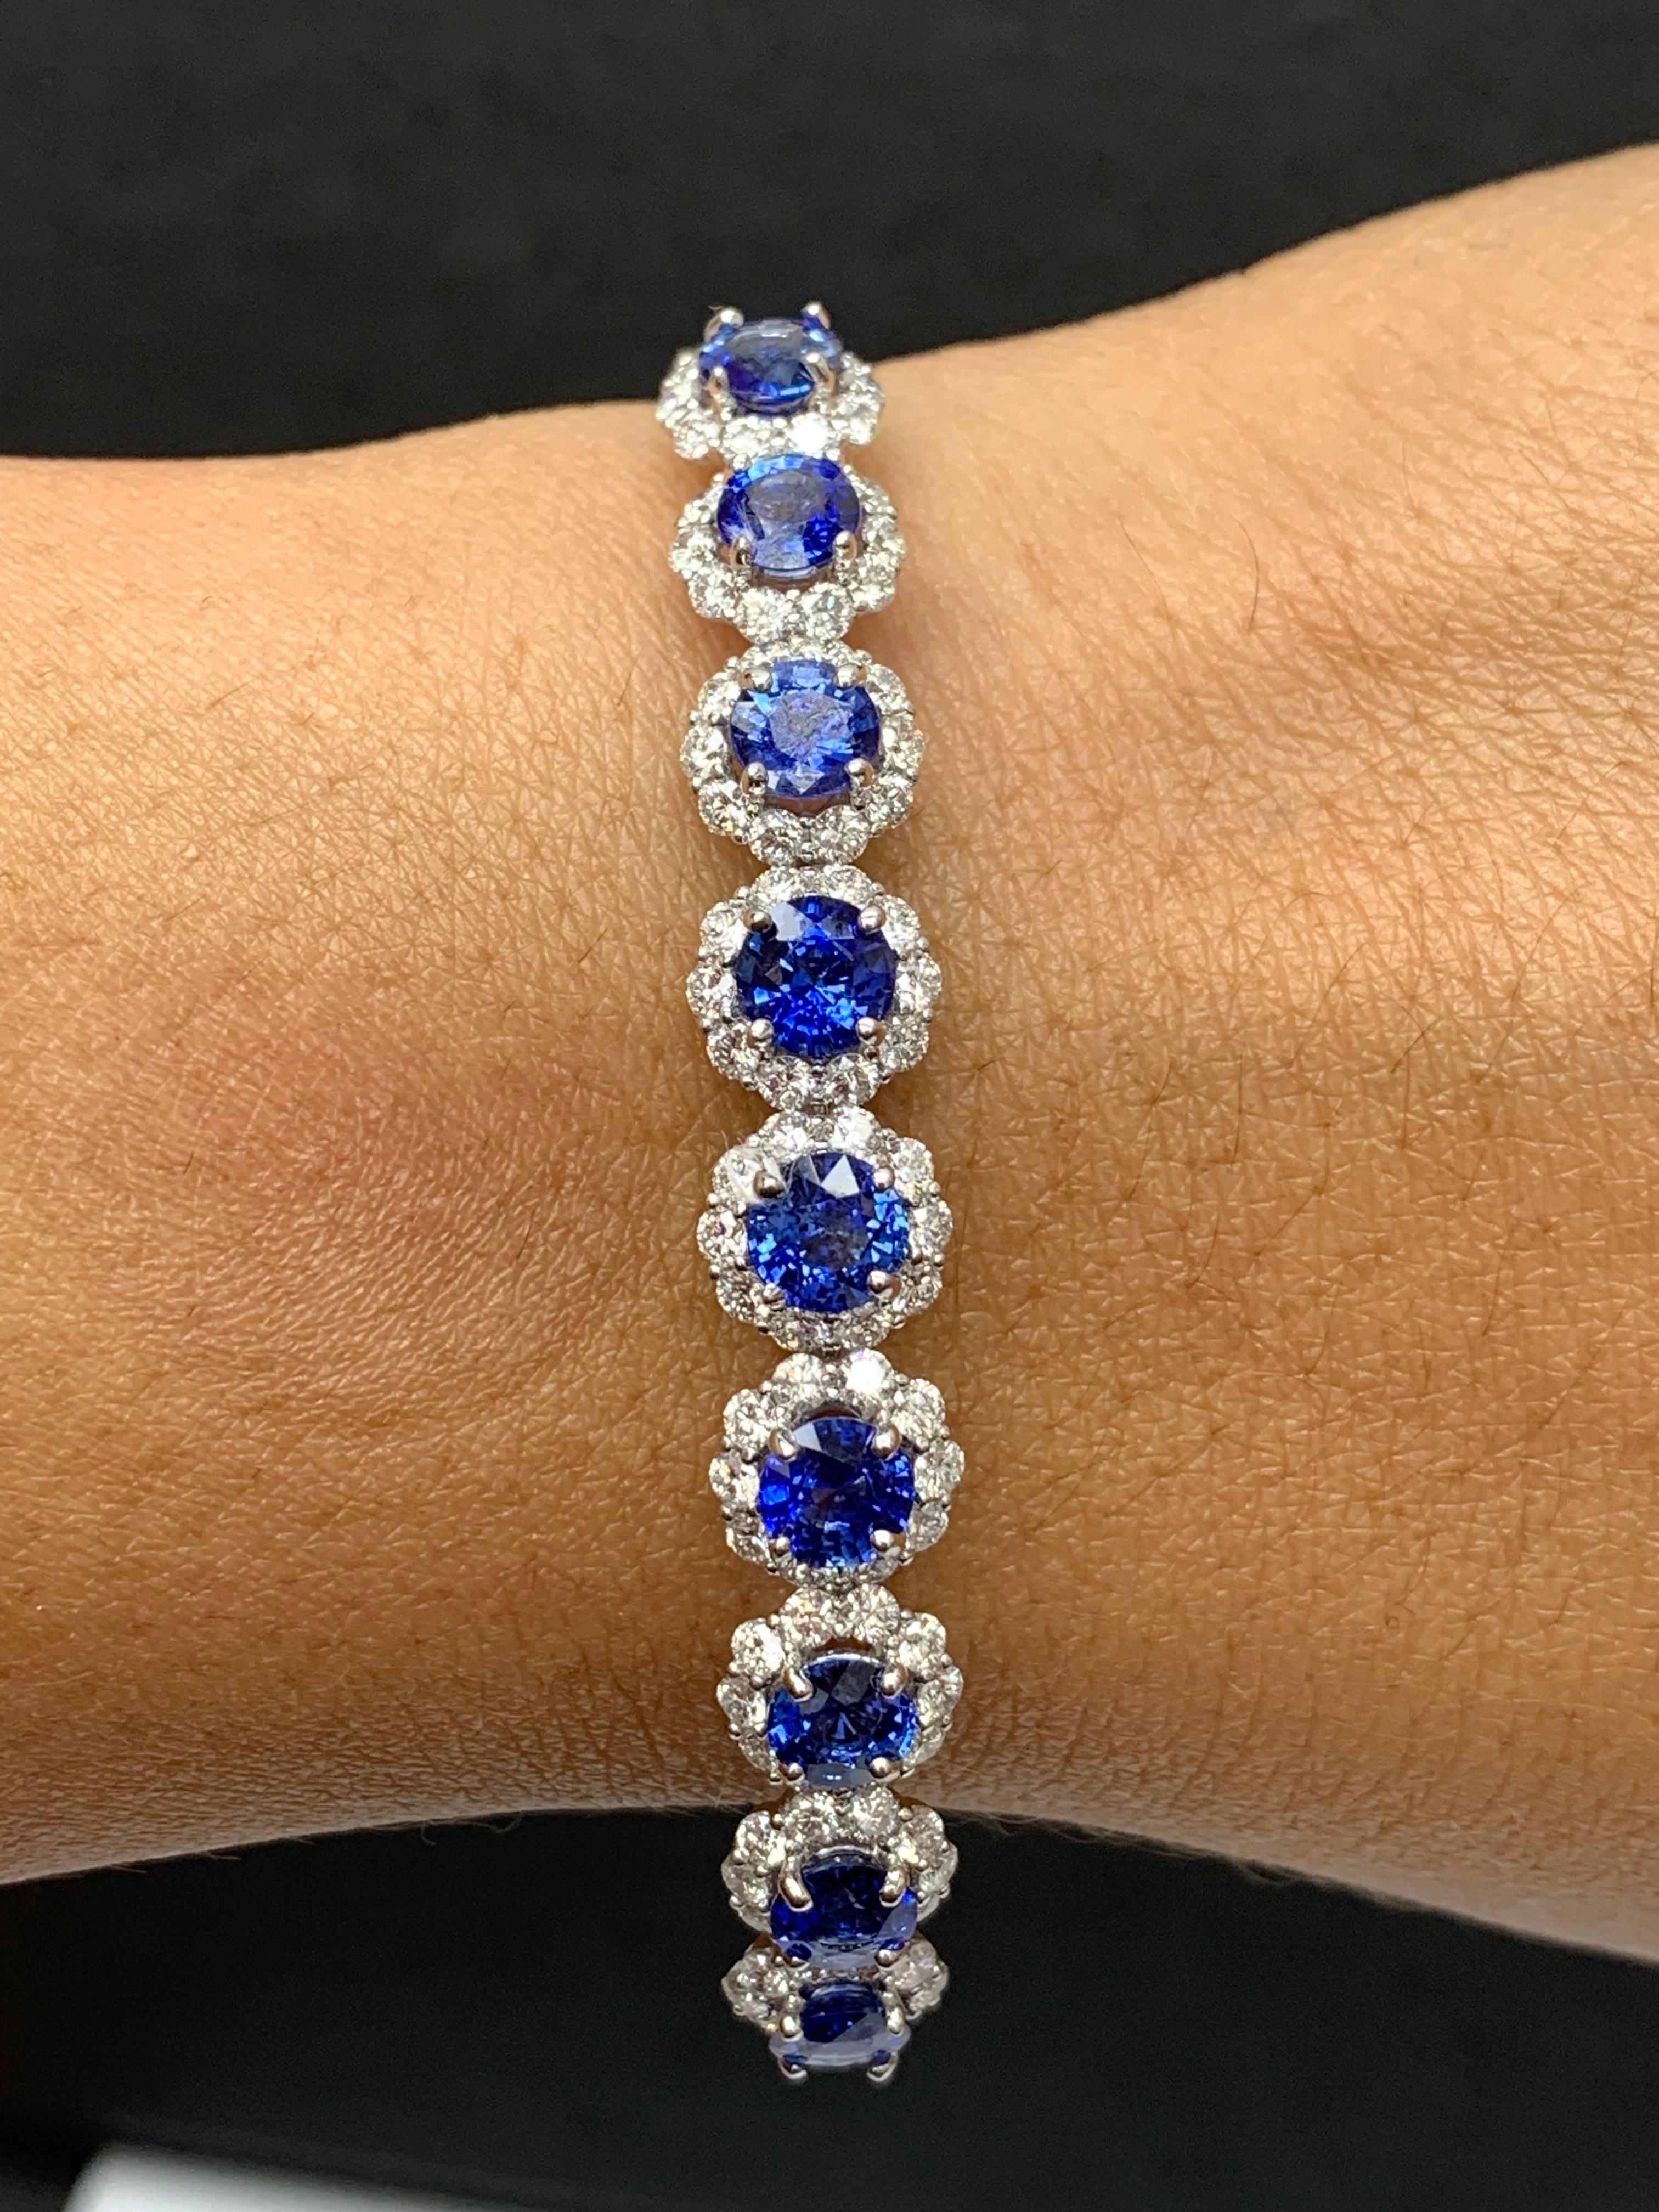 Sparkle in the spotlight with this brilliant cut ruby and diamond bangle bracelet. Features 9 brilliant-cut round blue sapphires weighing 4.88 carats and surrounding the blue sapphires are 90 diamonds weighing 2.45 carats elegantly set in an 18k